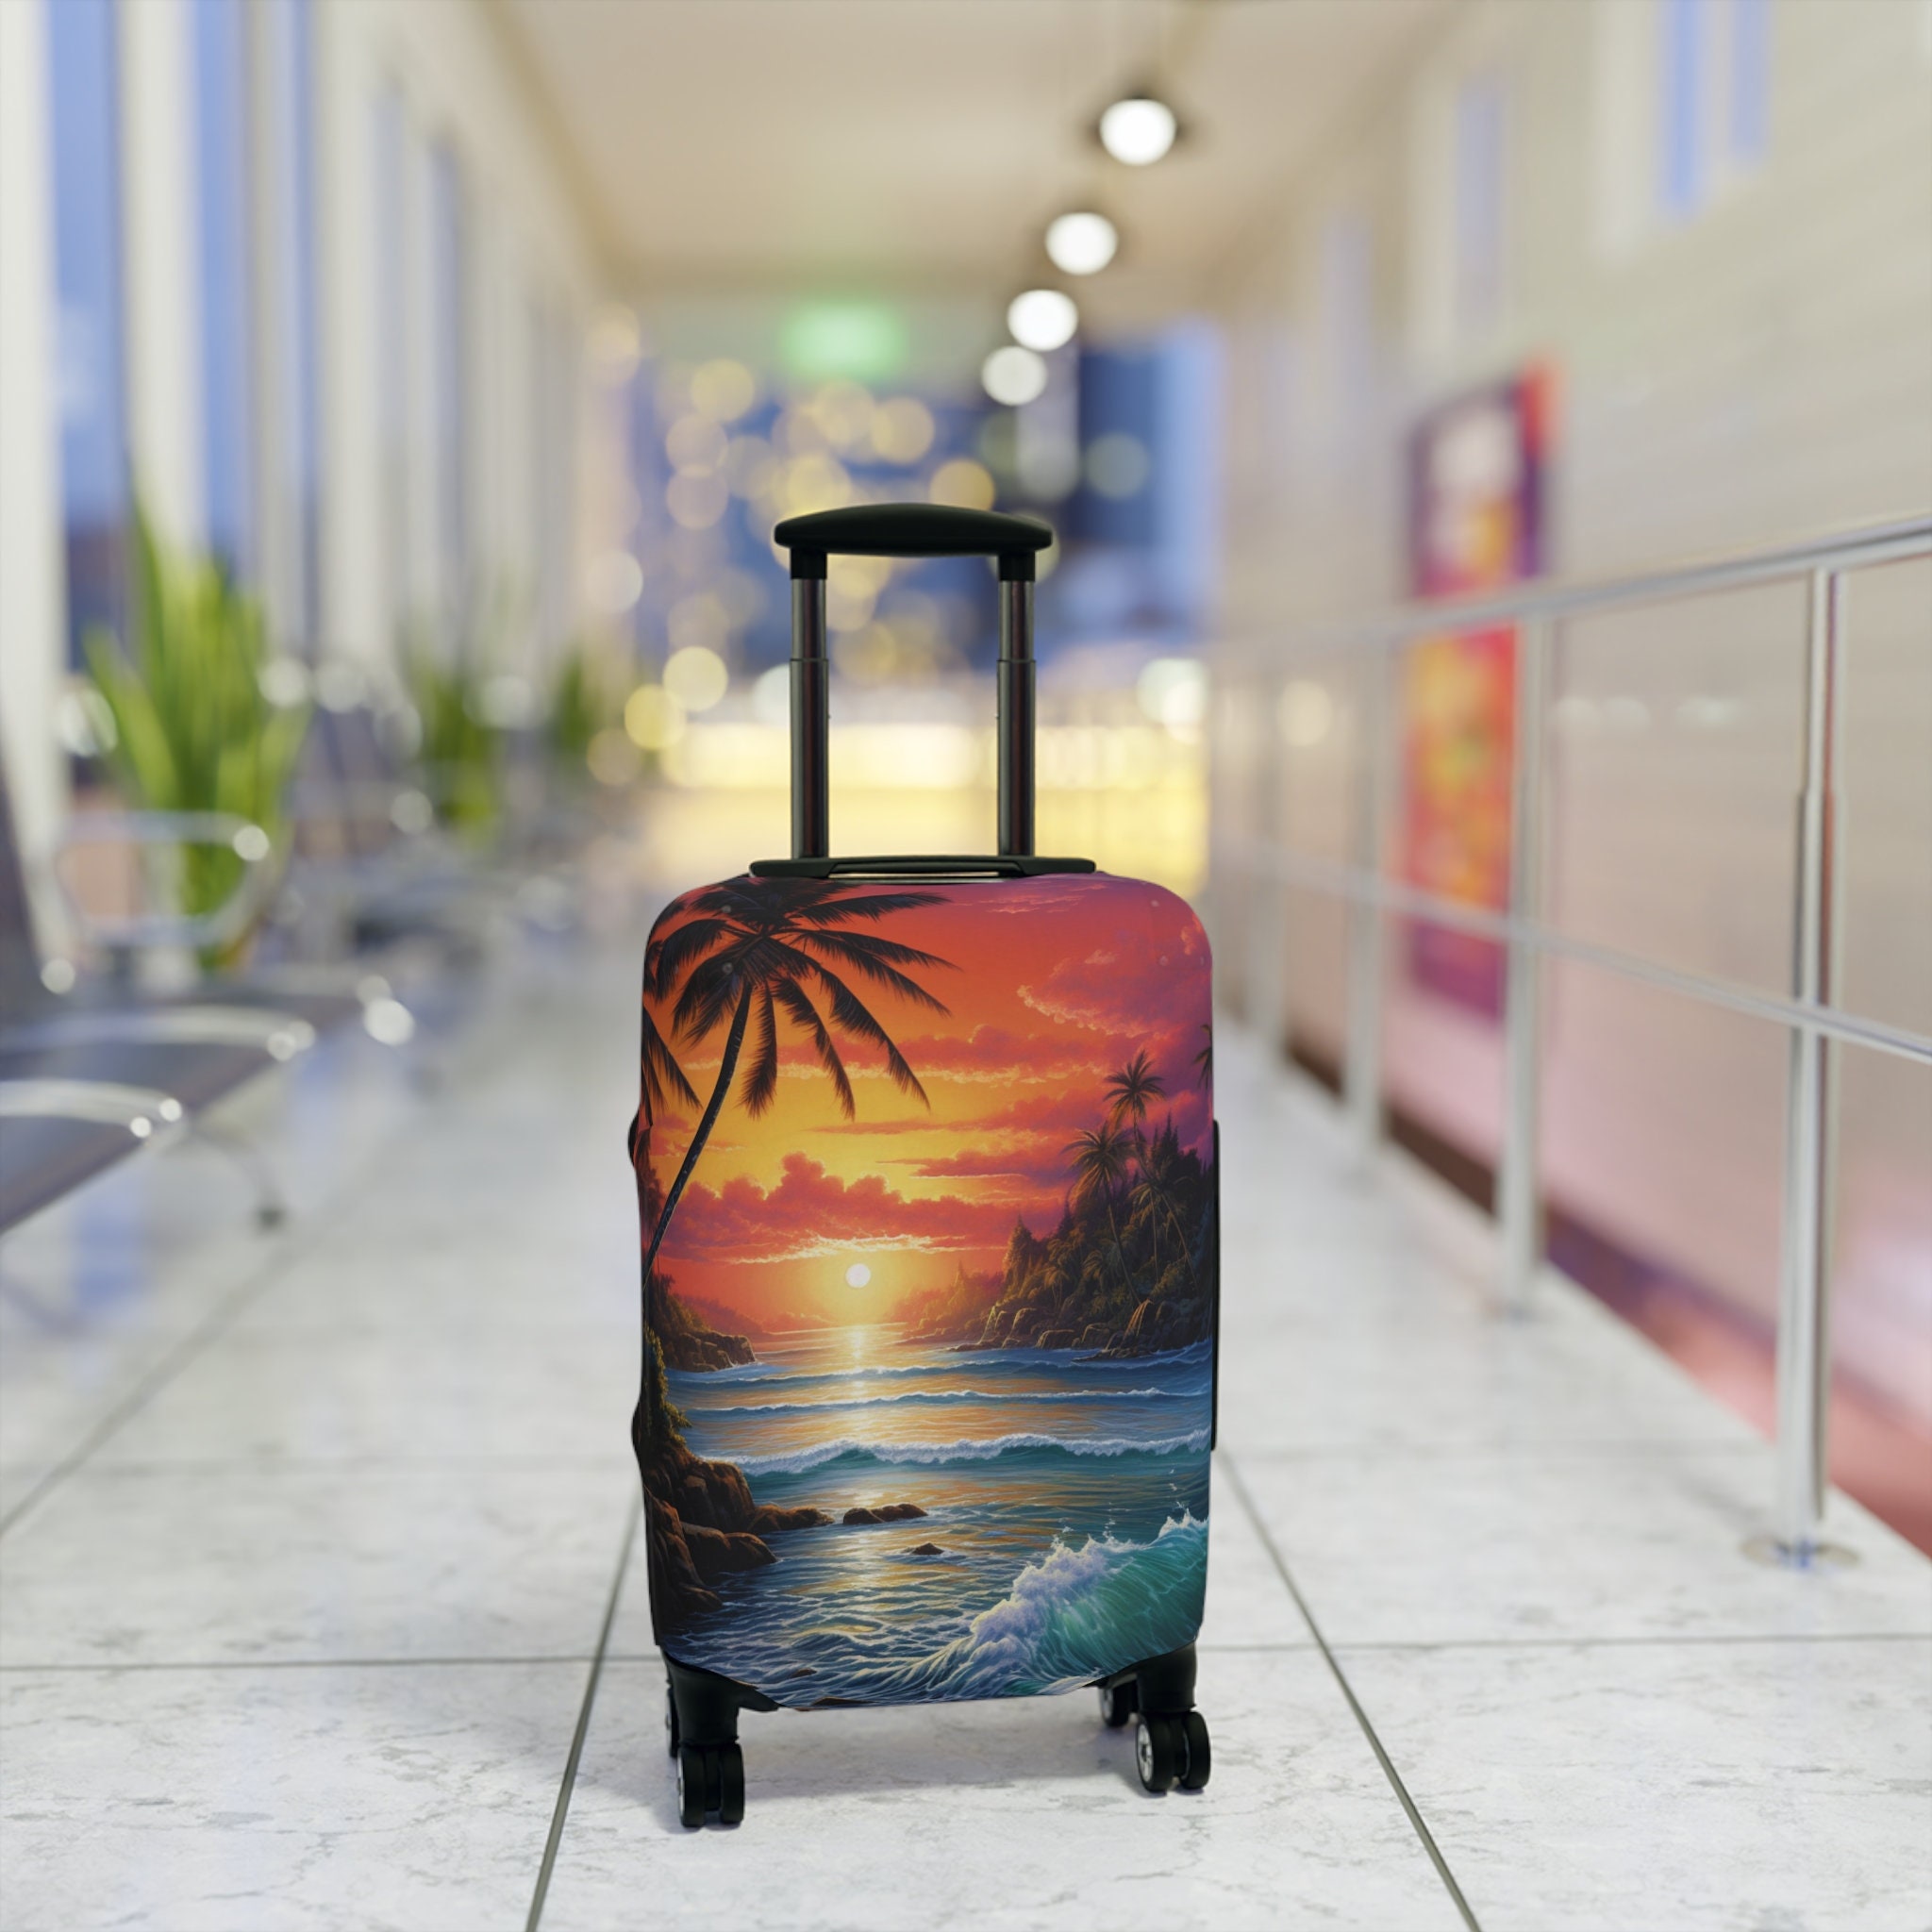 Luggage Cover Protector Tropical Beach luggage covers